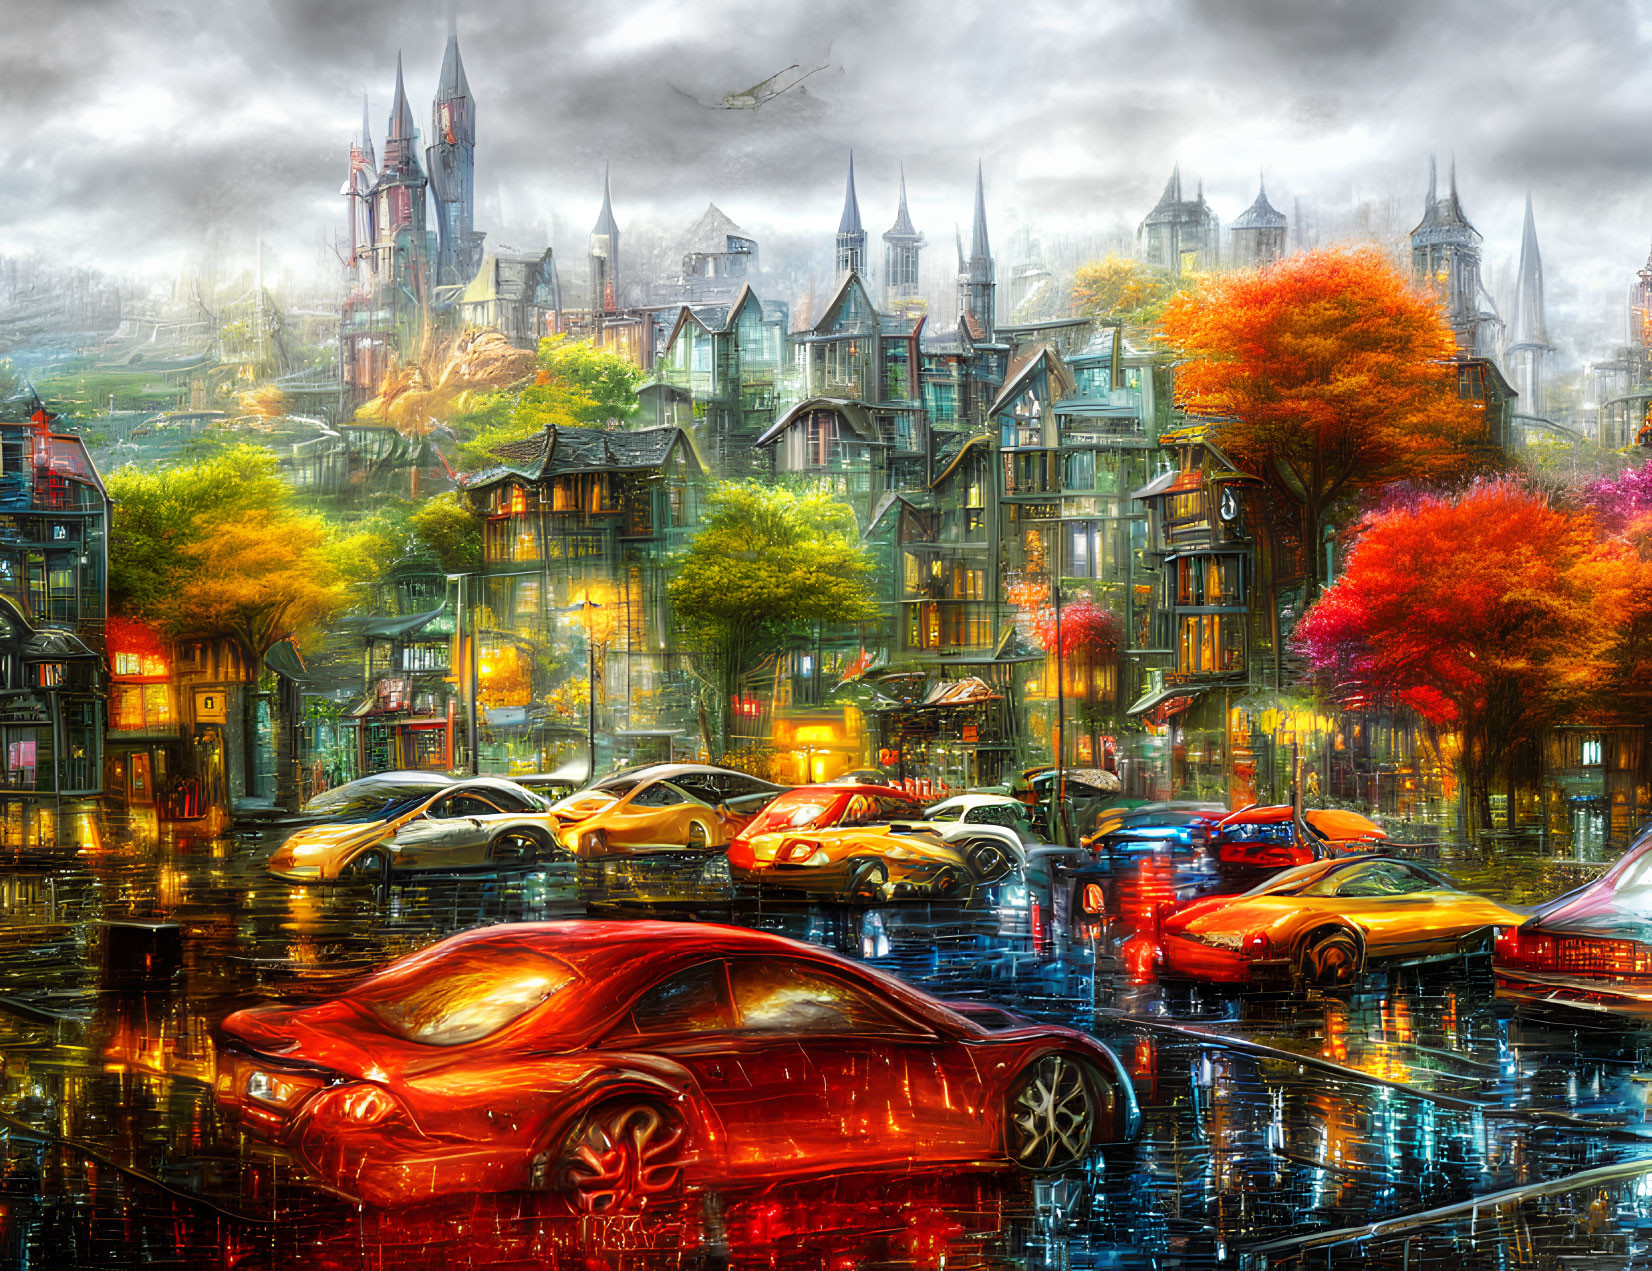 Colorful cityscape with glossy cars, castle, and dramatic sky